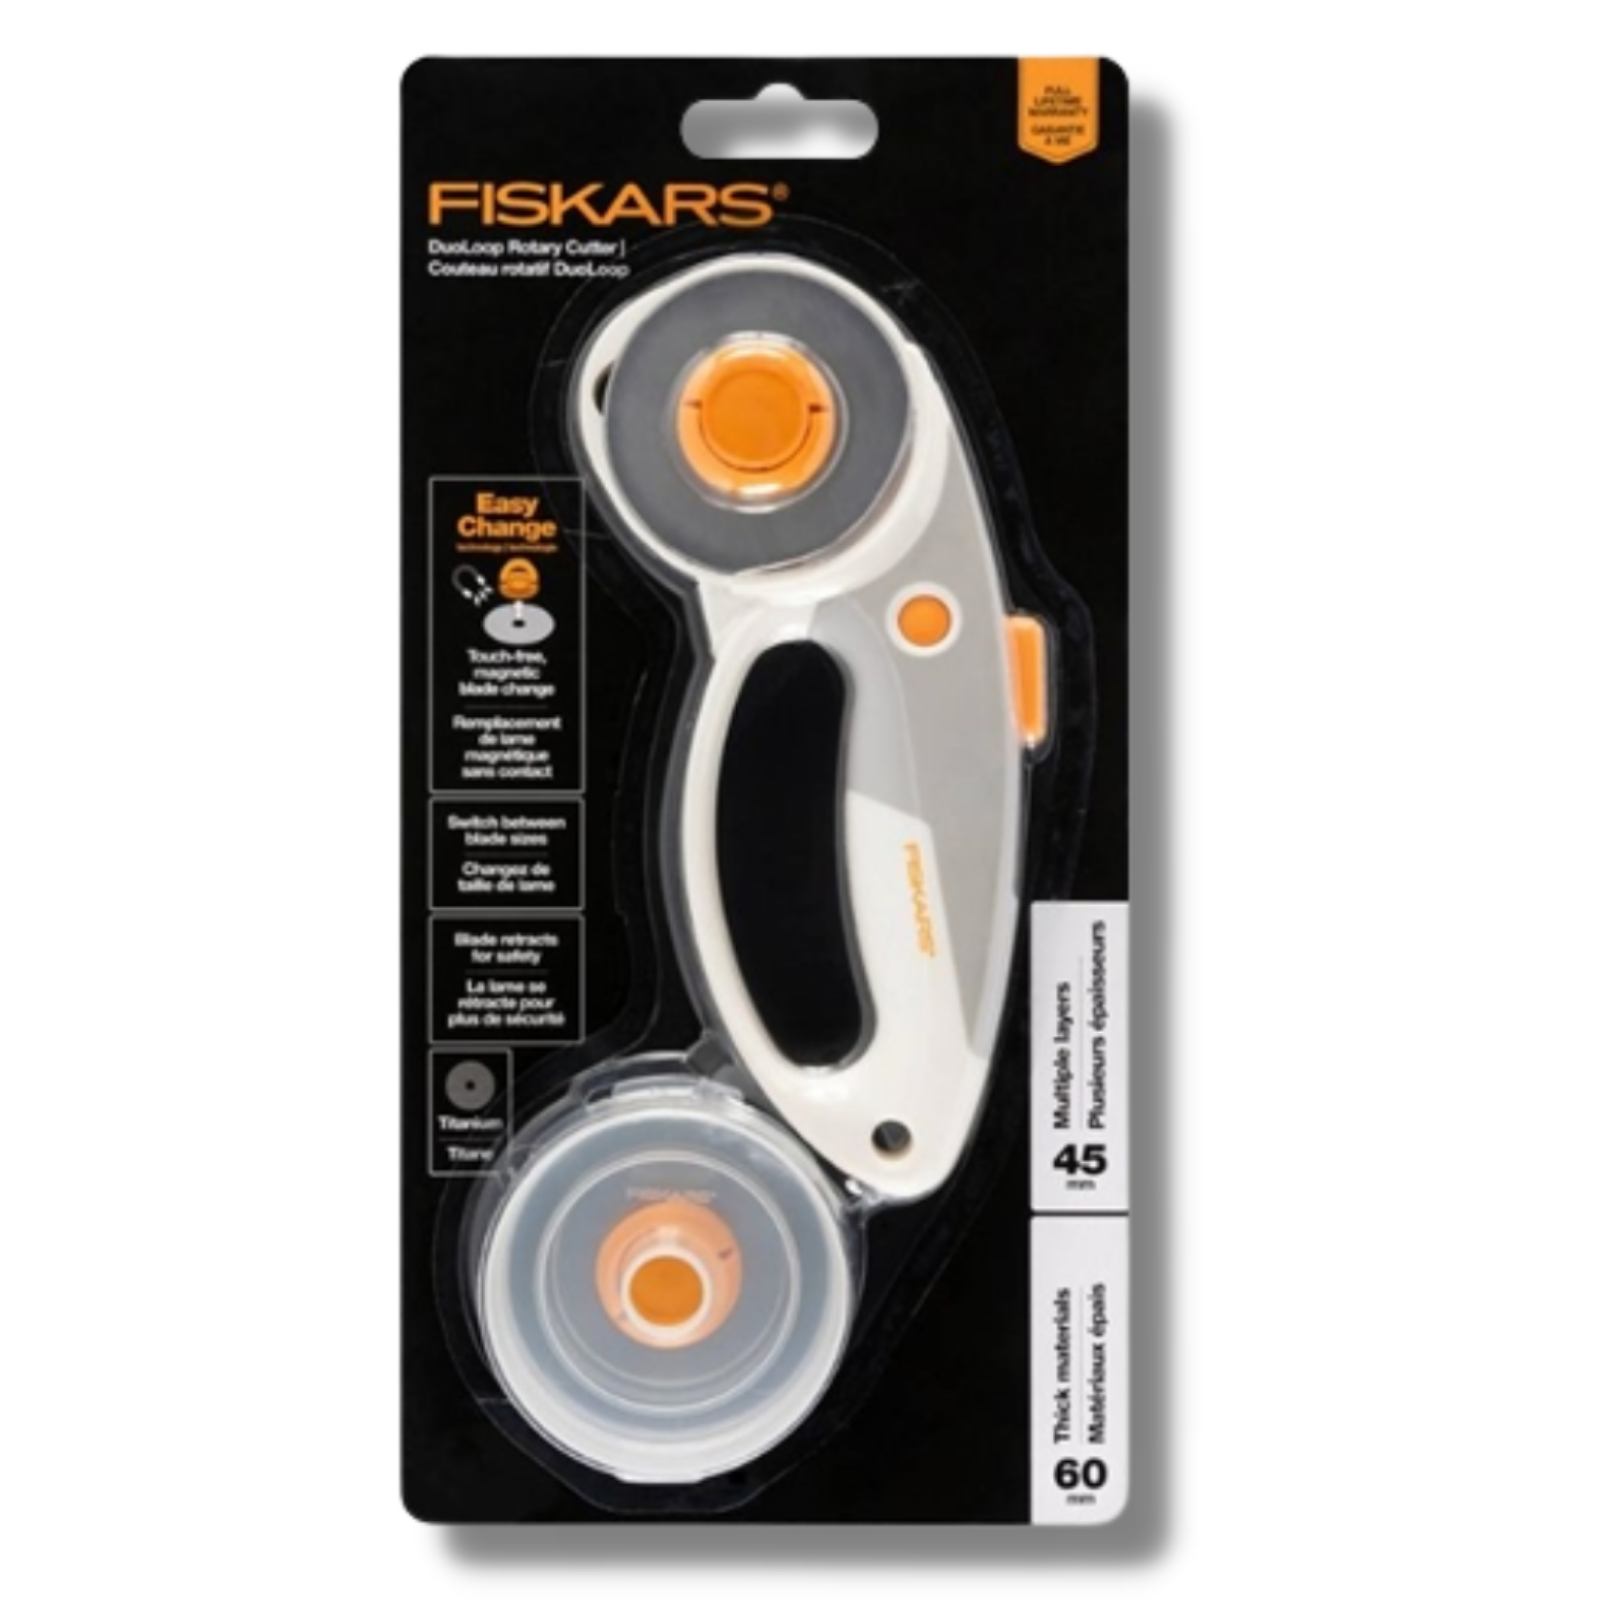 Fiskars 45 mm, 60 mm Rotary Cutter Blade, Easy Change DuoLoop - includes 45mm & 60mm blades, blade hubs & storage